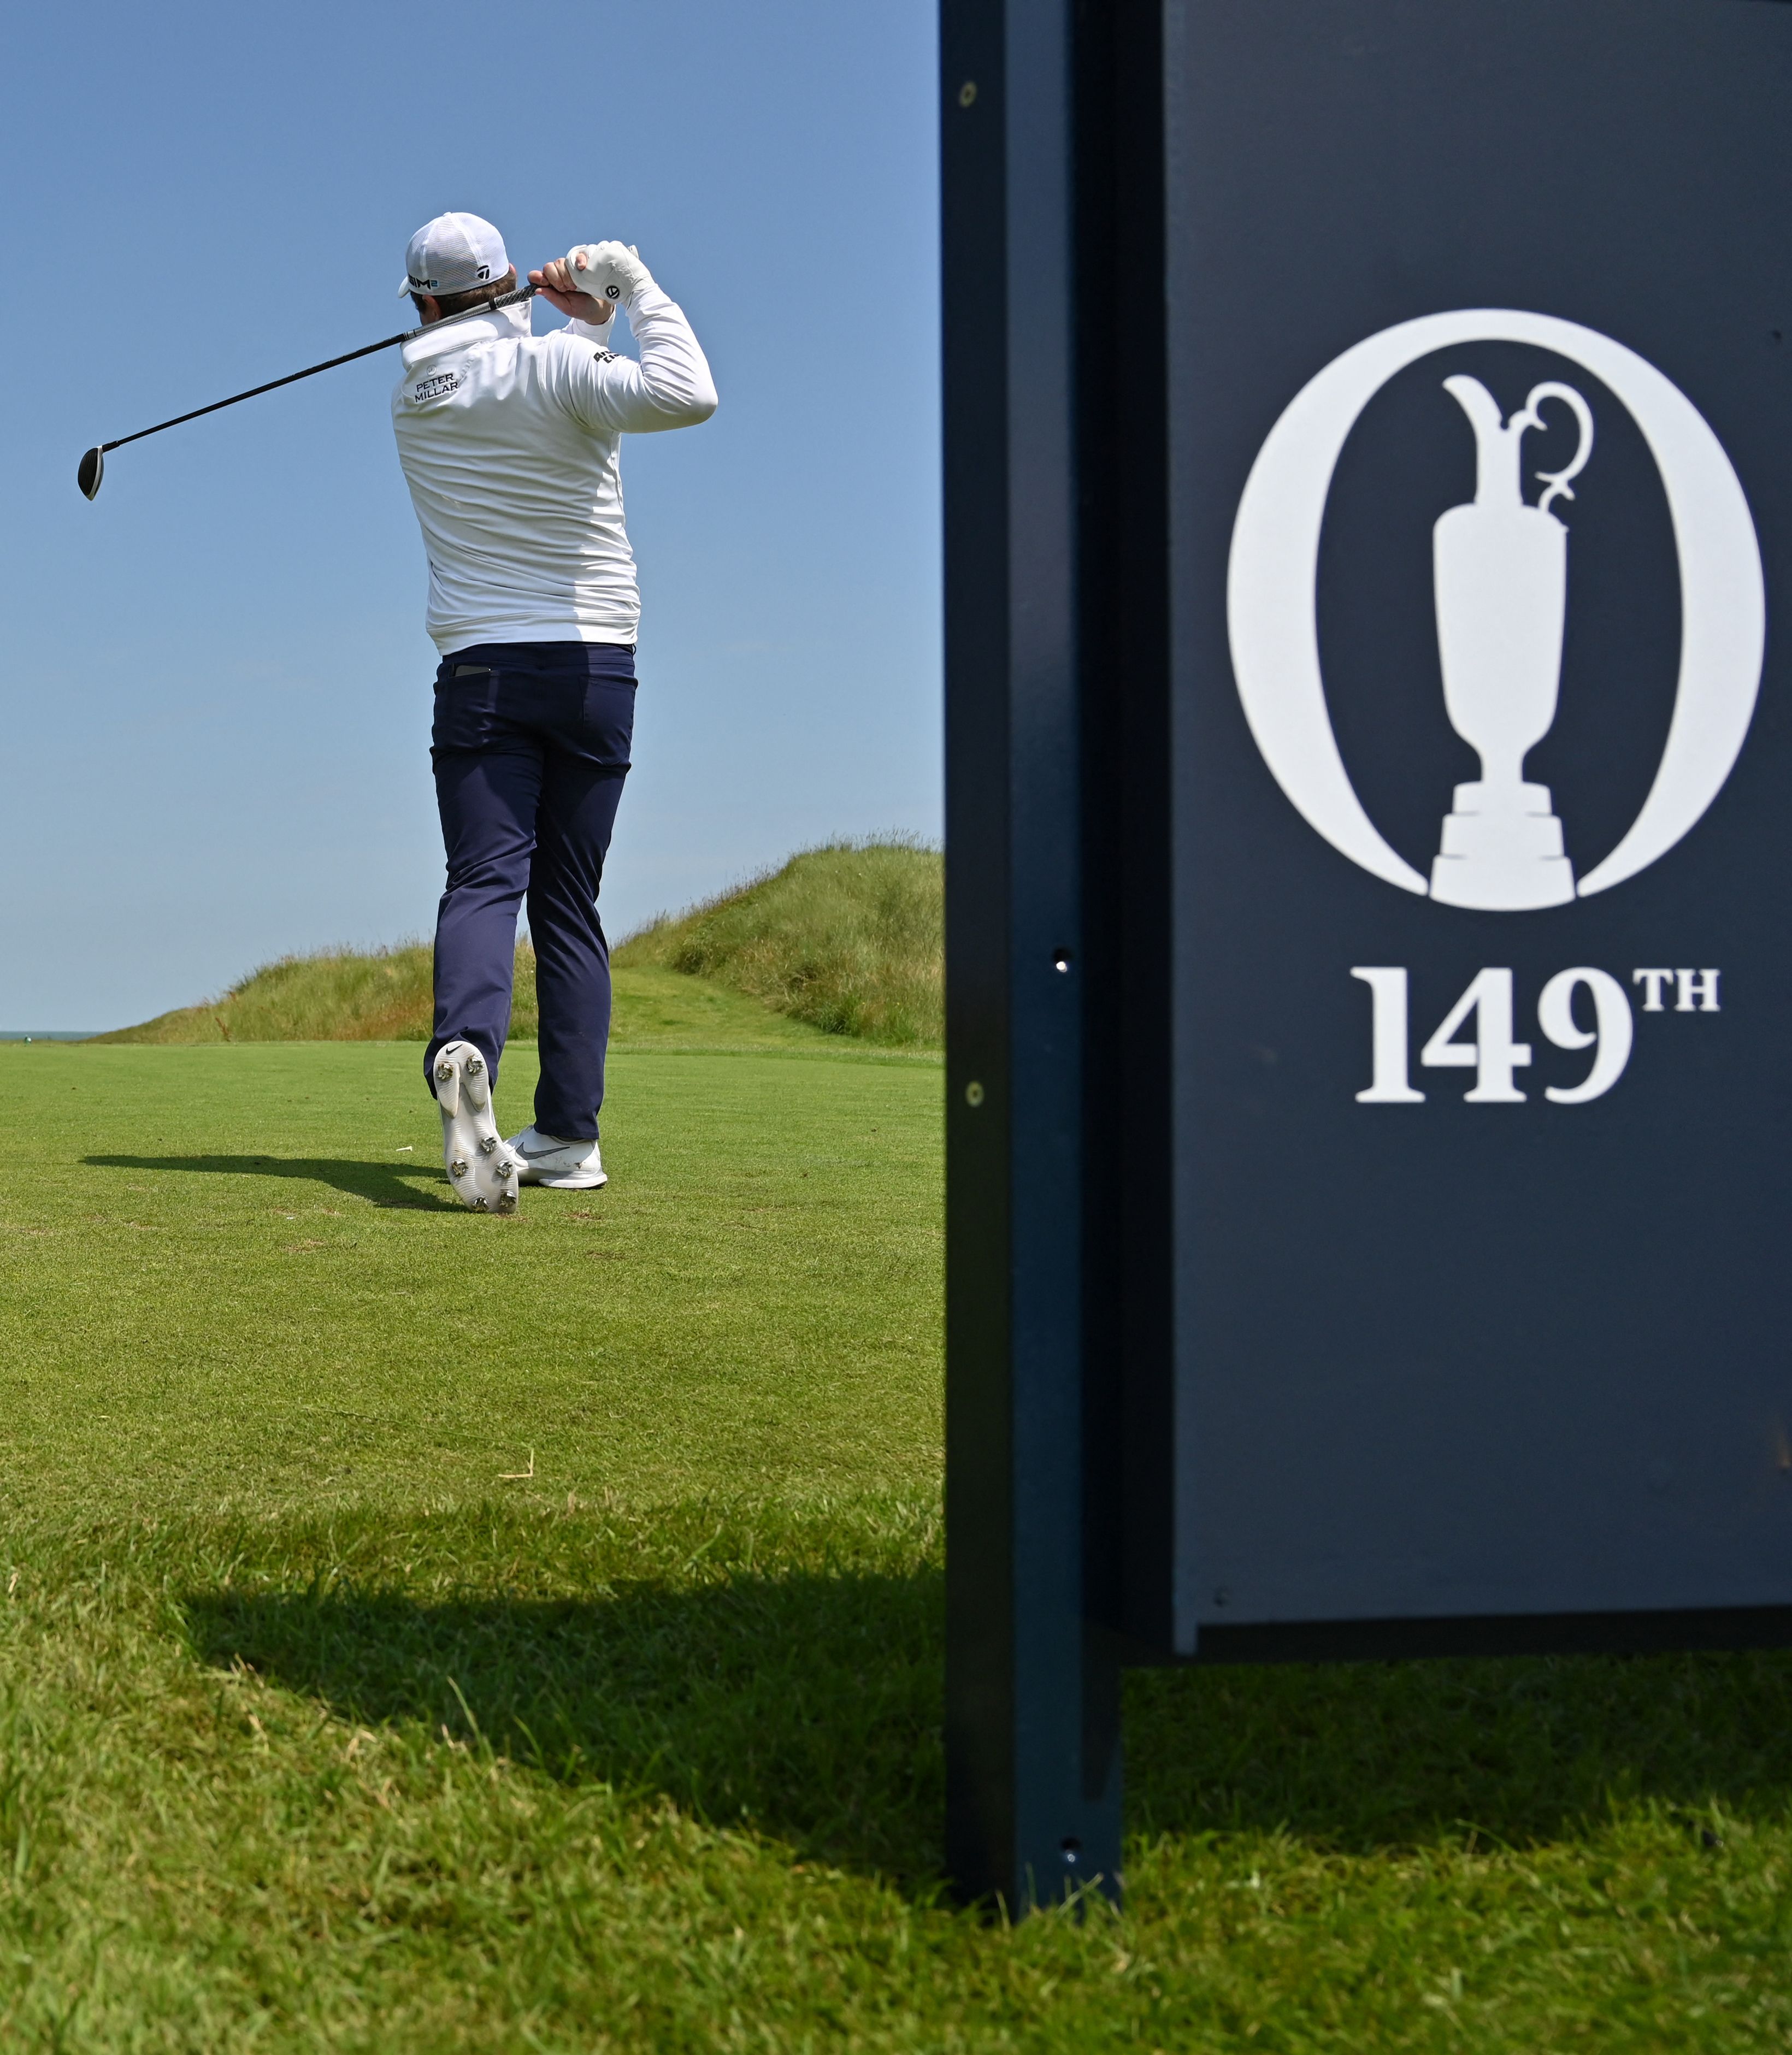 Scotland’s Robert MacIntyre plays from the 5th tee during a practice round for The 149th British Open Golf Championship at Royal St George’s, Sandwich in south-east England on July 13, 2021.